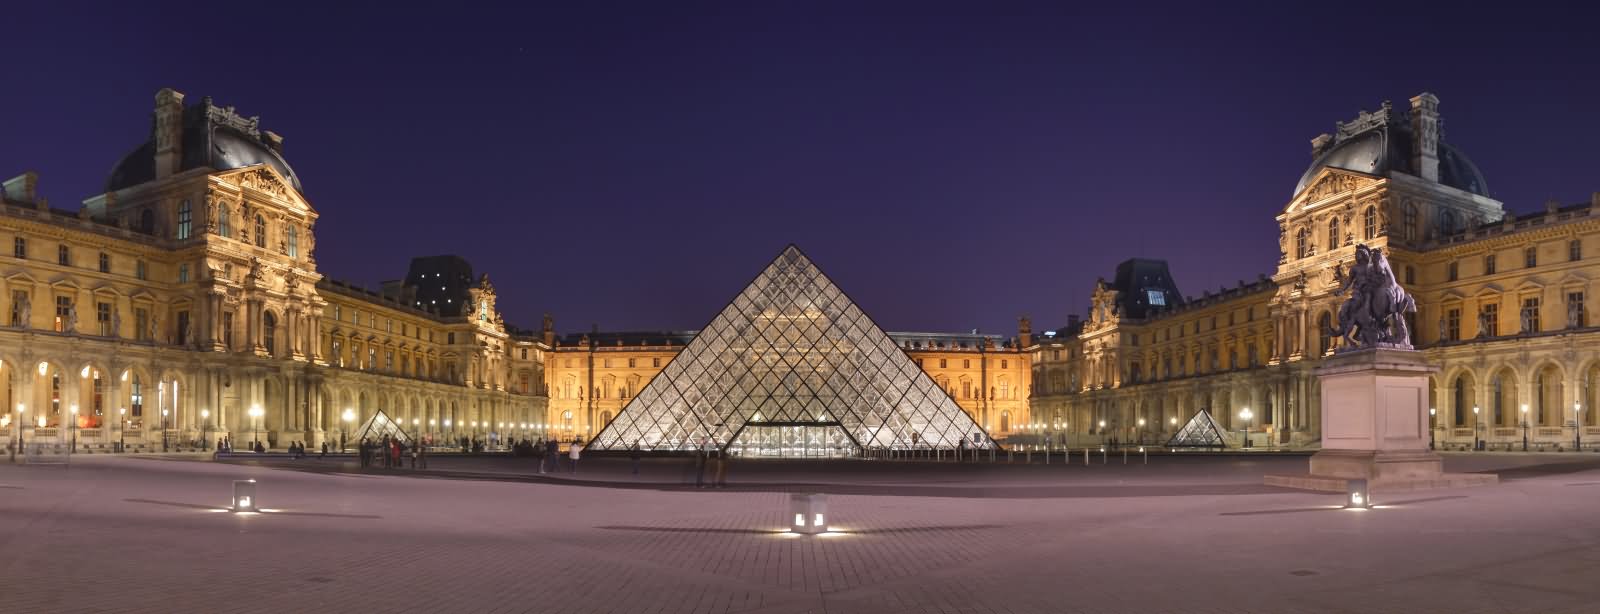 Beautiful Night Picture Of Louvre Palace And The Glass Pyramid